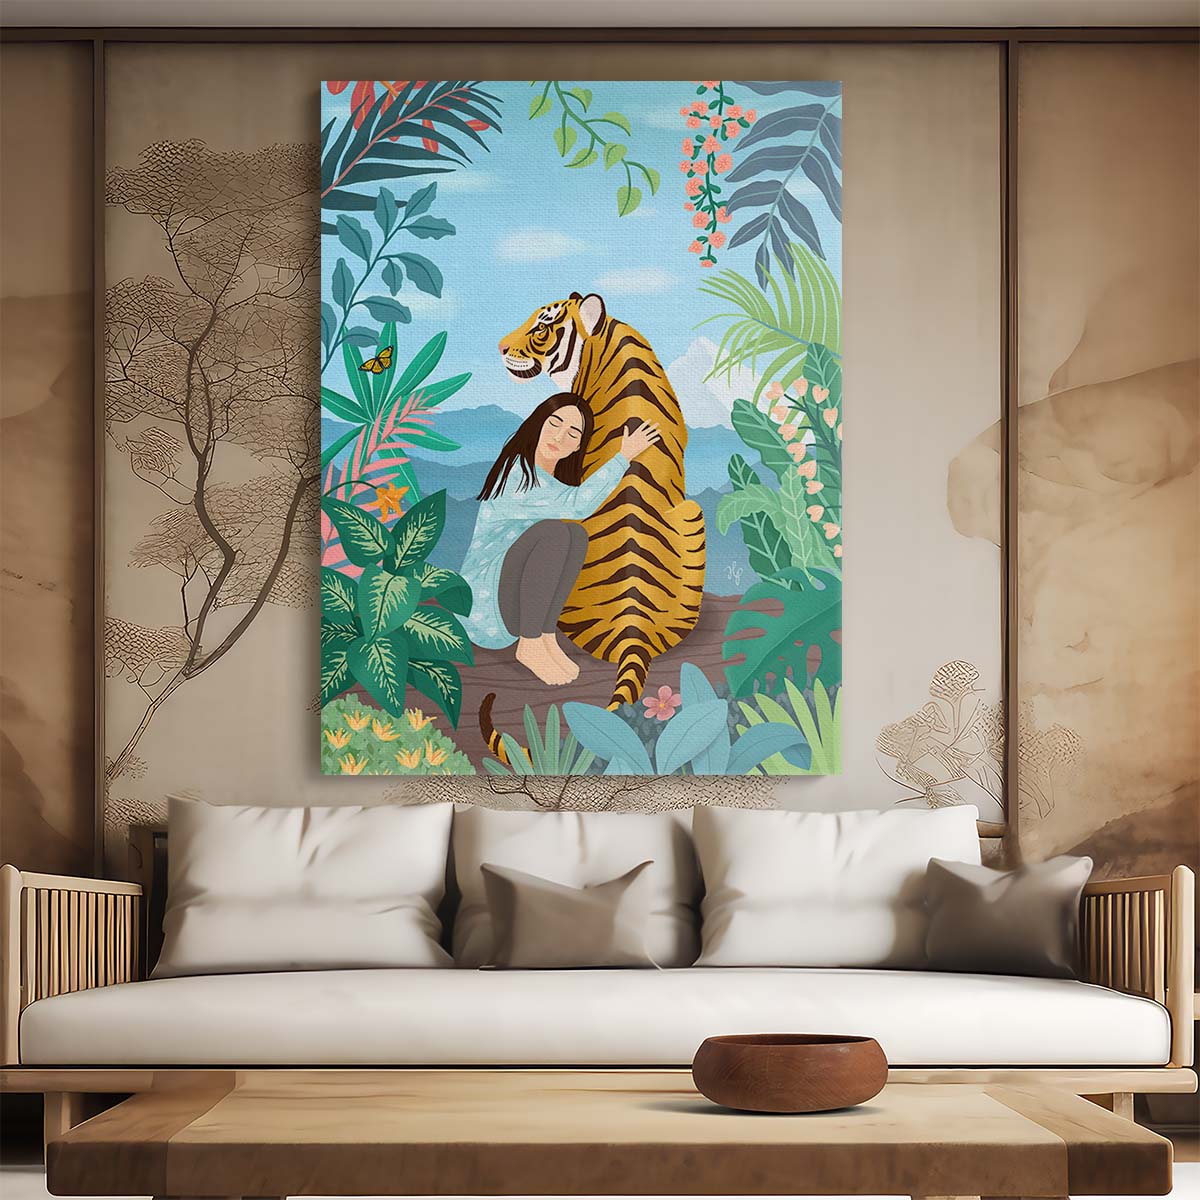 Tranquil Illustration of Woman Embracing Tiger in Tropical Paradise by Luxuriance Designs, made in USA